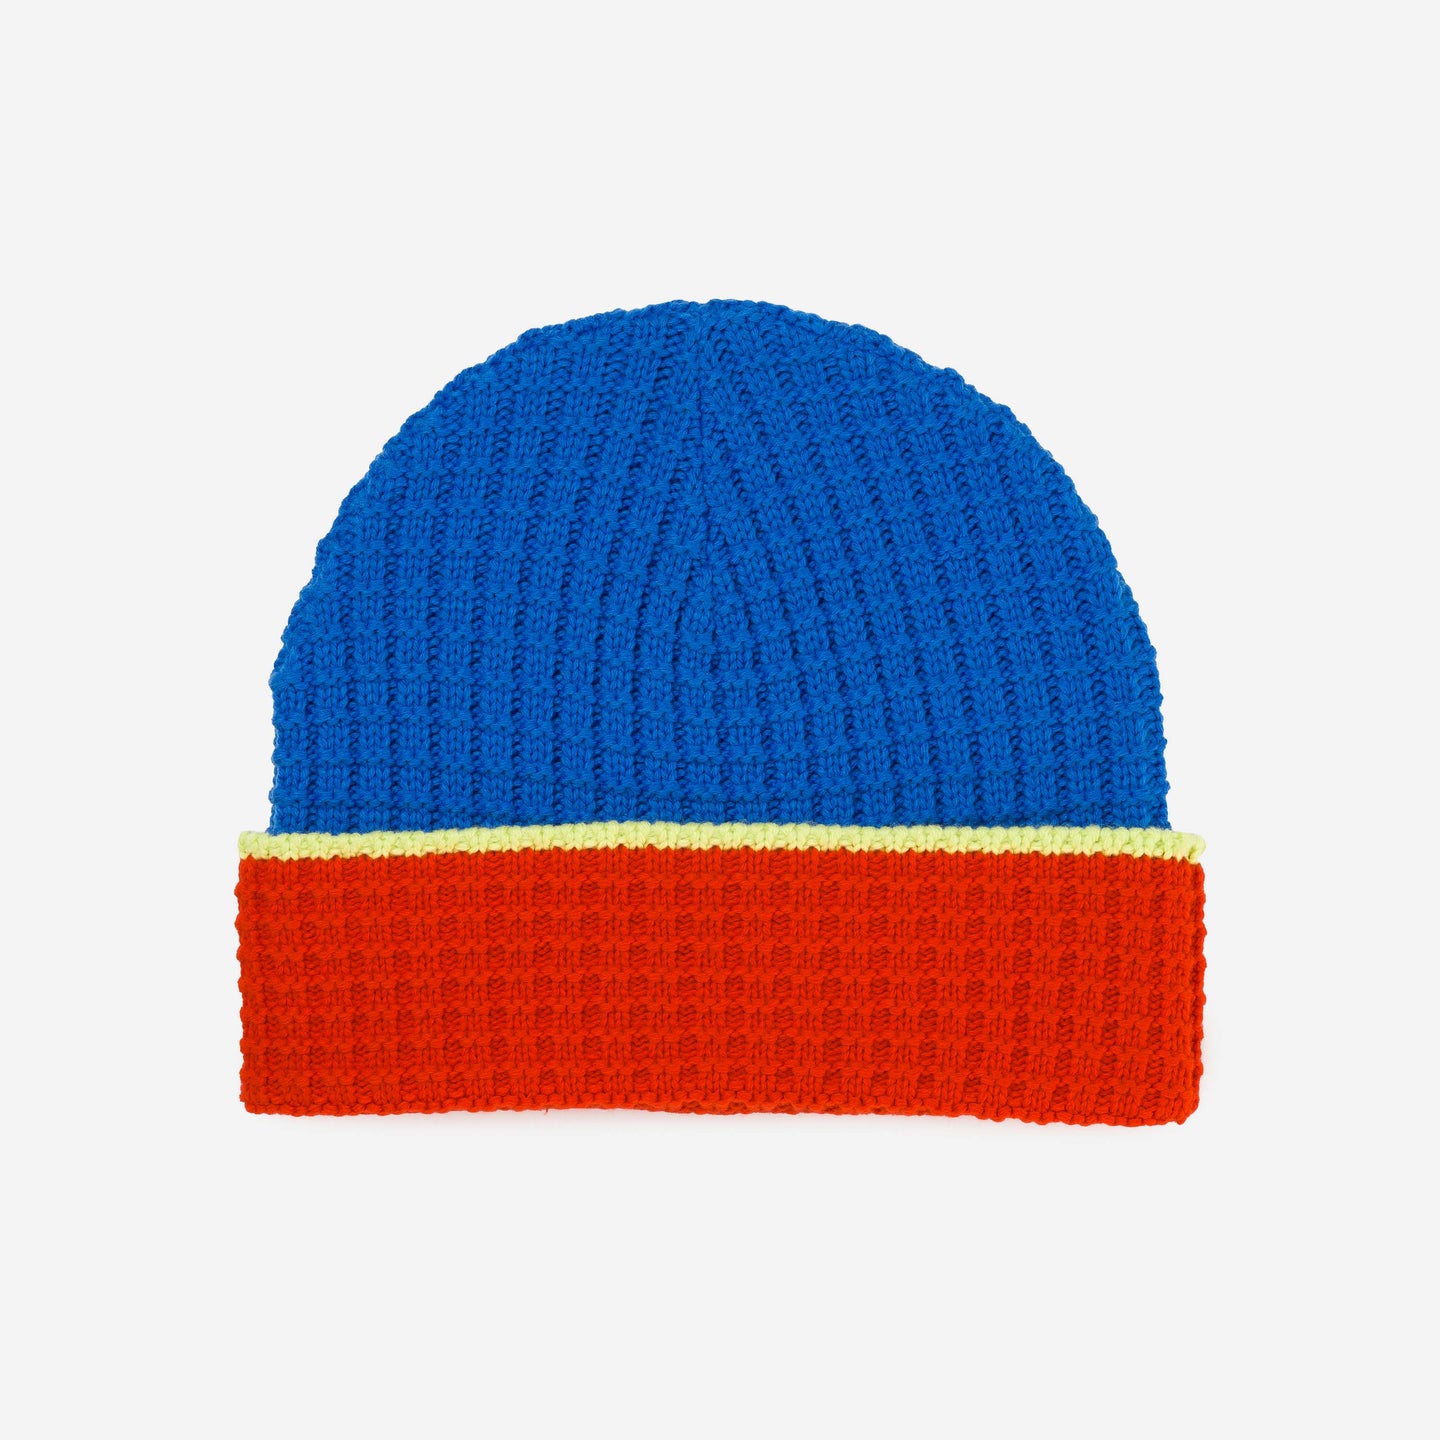 Waffle Knit Colorblock Beanie Chunky Knit Hat